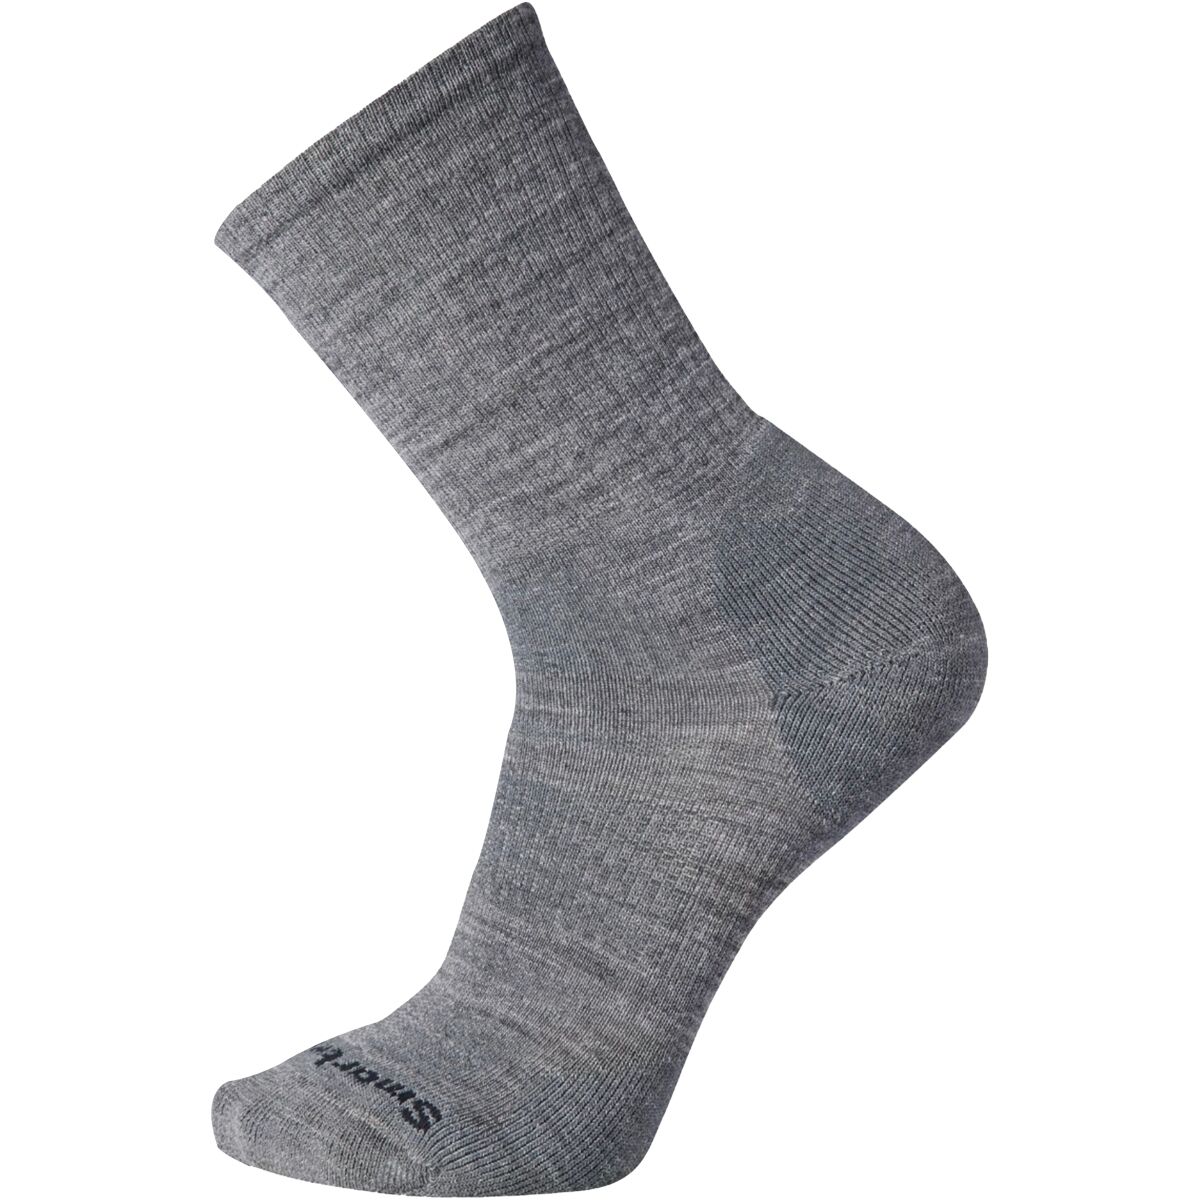 Smartwool Athletic Targeted Cushion Crew Sock - 2-Pack